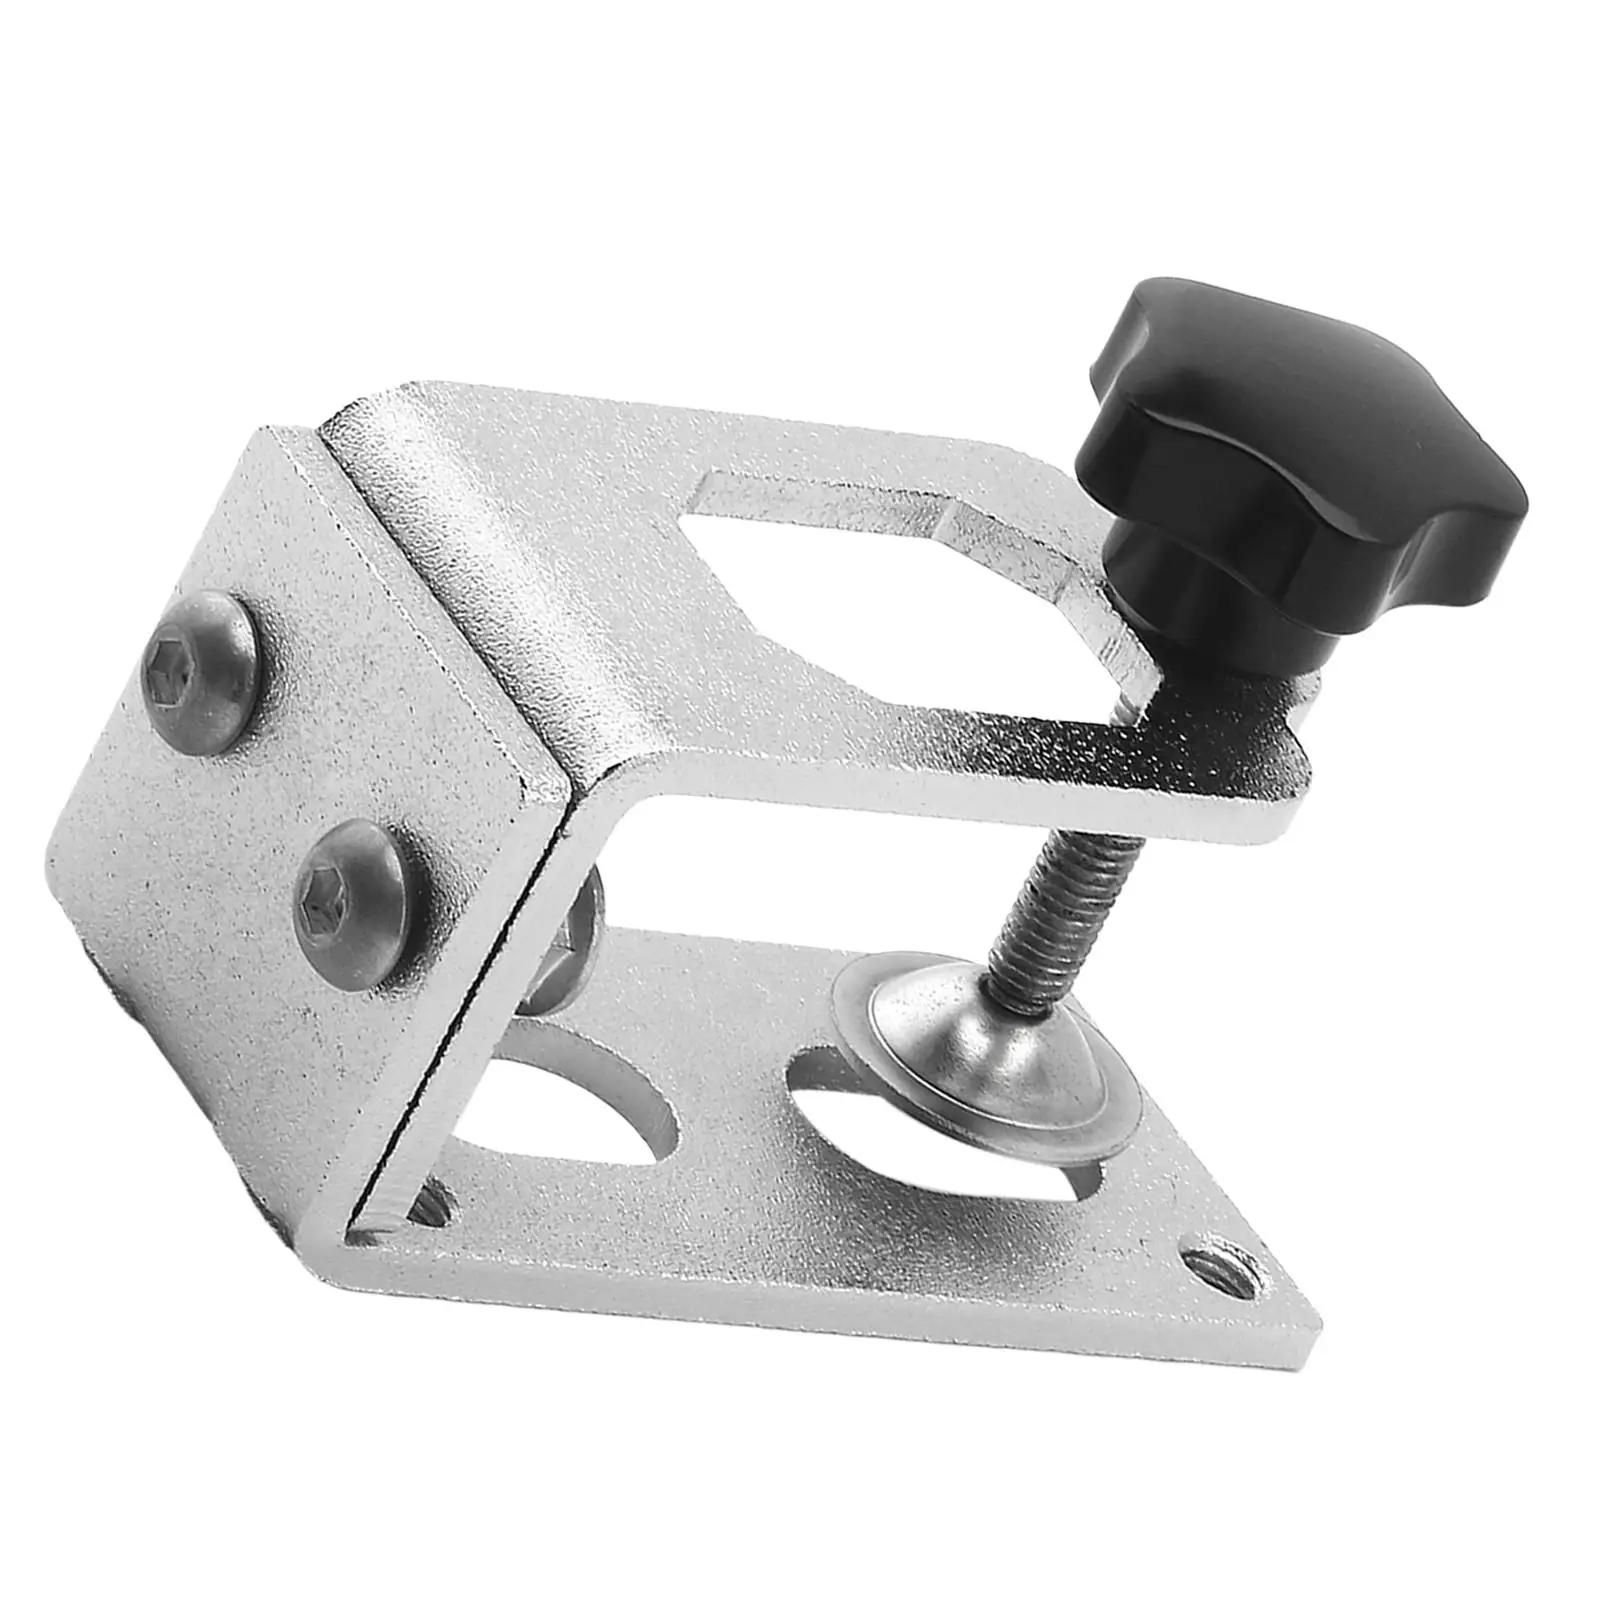 Handbrake Clamp Replacement Parts Bracket Accessories universal professionals Durable Table Bench for Truck Racing Games